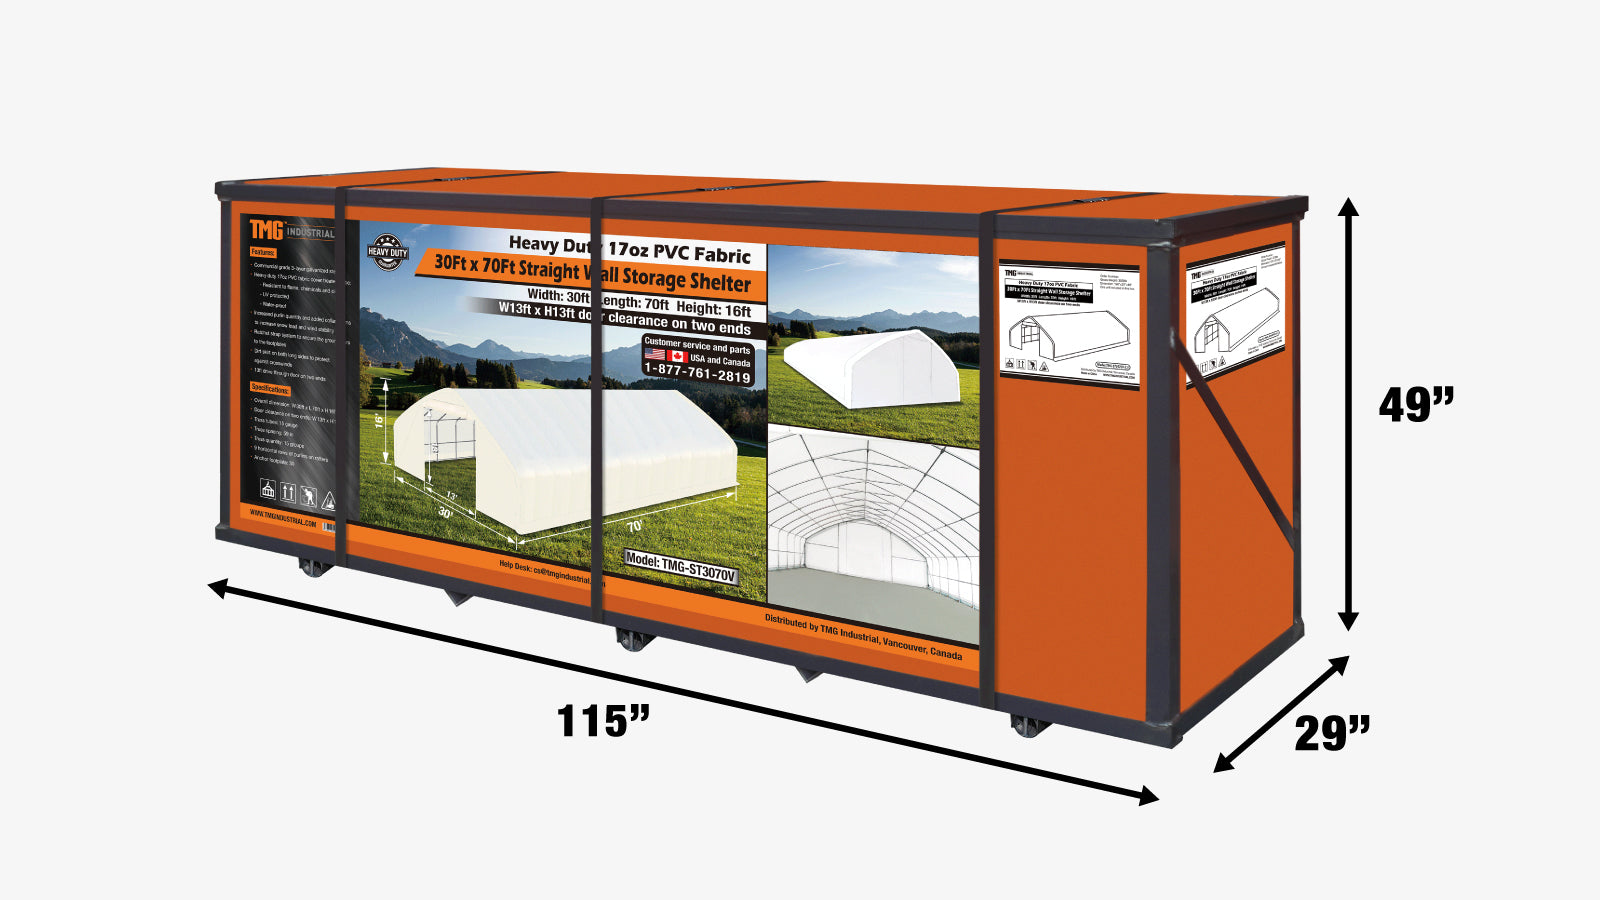 TMG Industrial 30' x 70' Straight Wall Peak Ceiling Storage Shelter with Heavy Duty 17 oz PVC Cover & Drive Through Doors, TMG-ST3070V-shipping-info-image